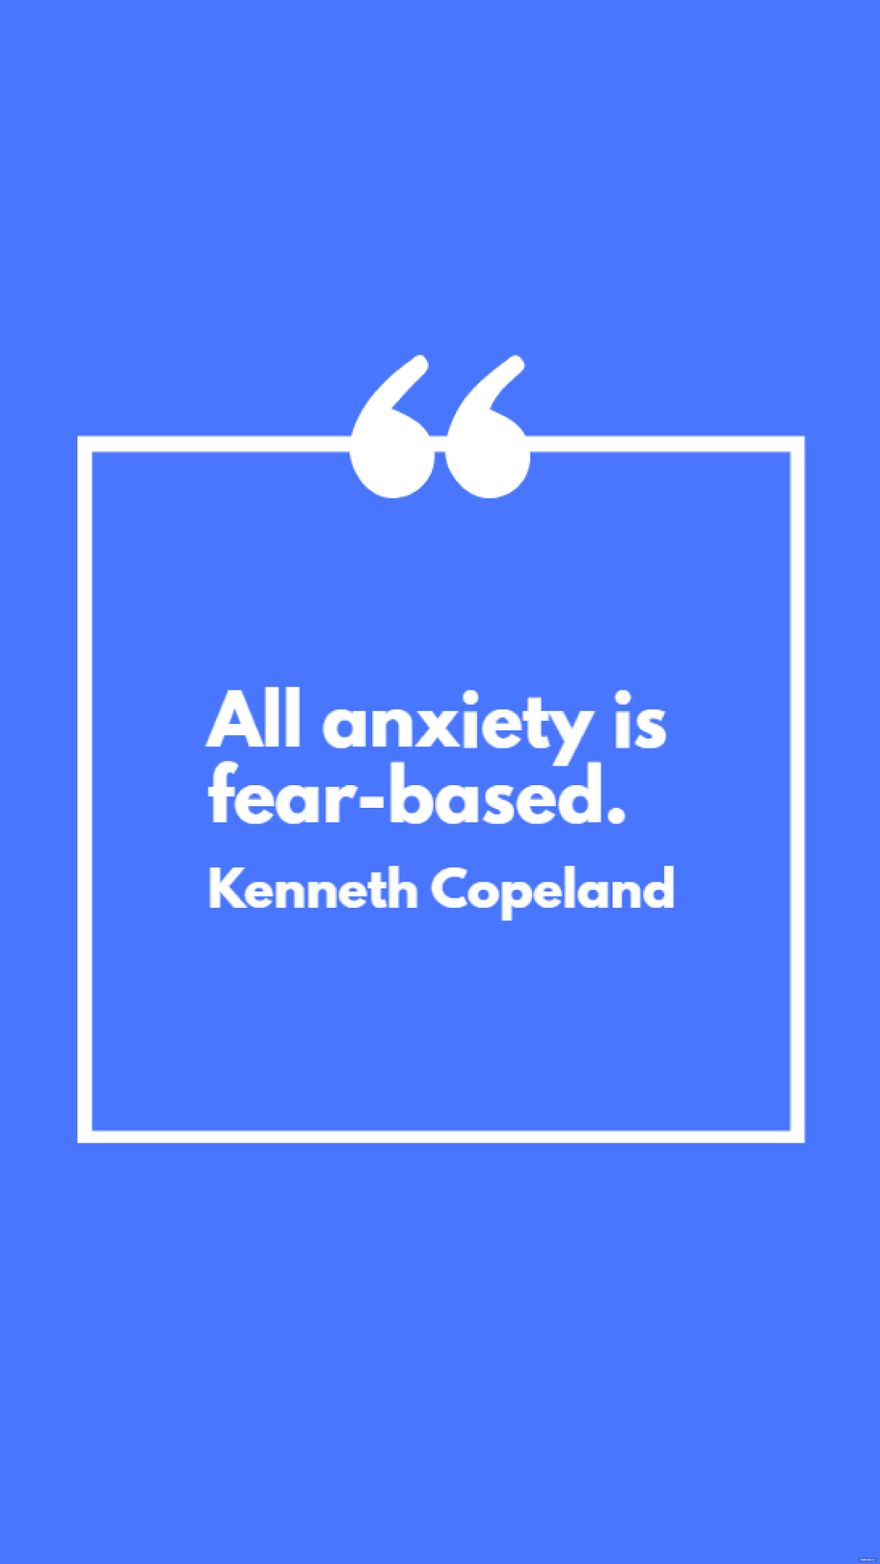 Kenneth Copeland - All anxiety is fear-based.